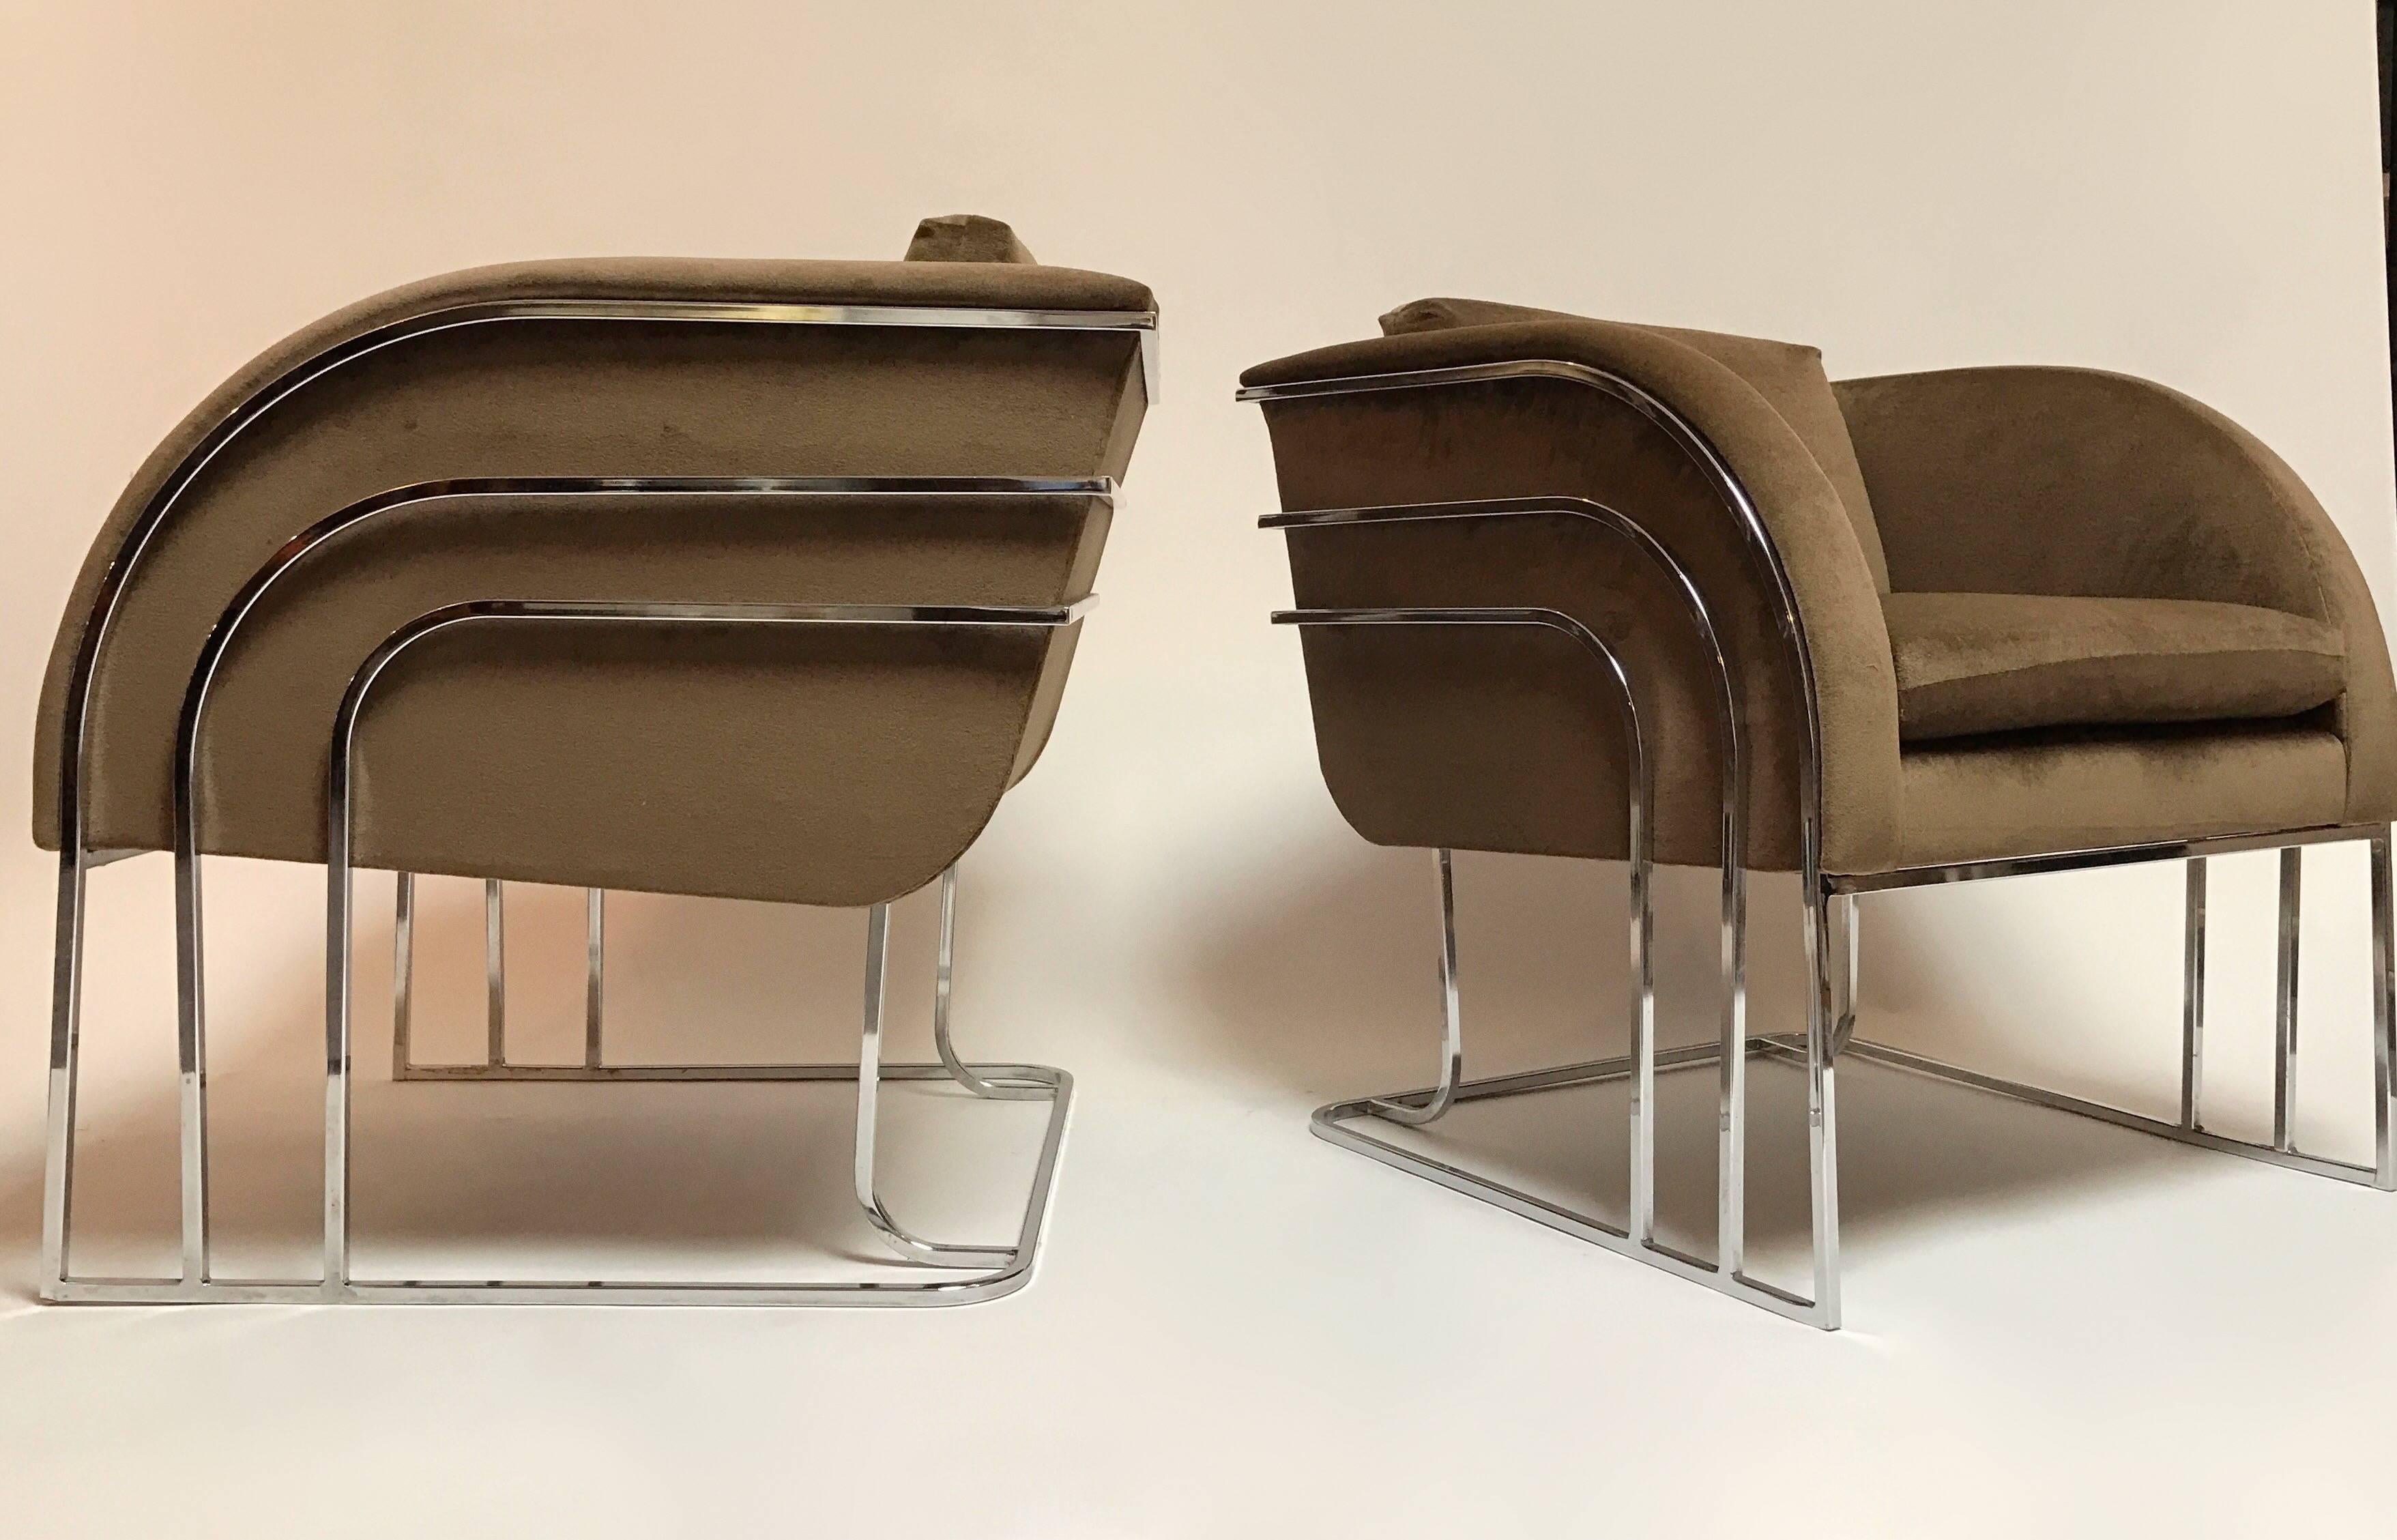 Absolutely gorgeous pair of chrome lounge chairs by Milo Baughman for Thayer Coggin. Sculptural waterfall design. Newly reupholstered in a Holly Hunt velvet fabric. Stunning! Incredibly comfortable and nice proportions.